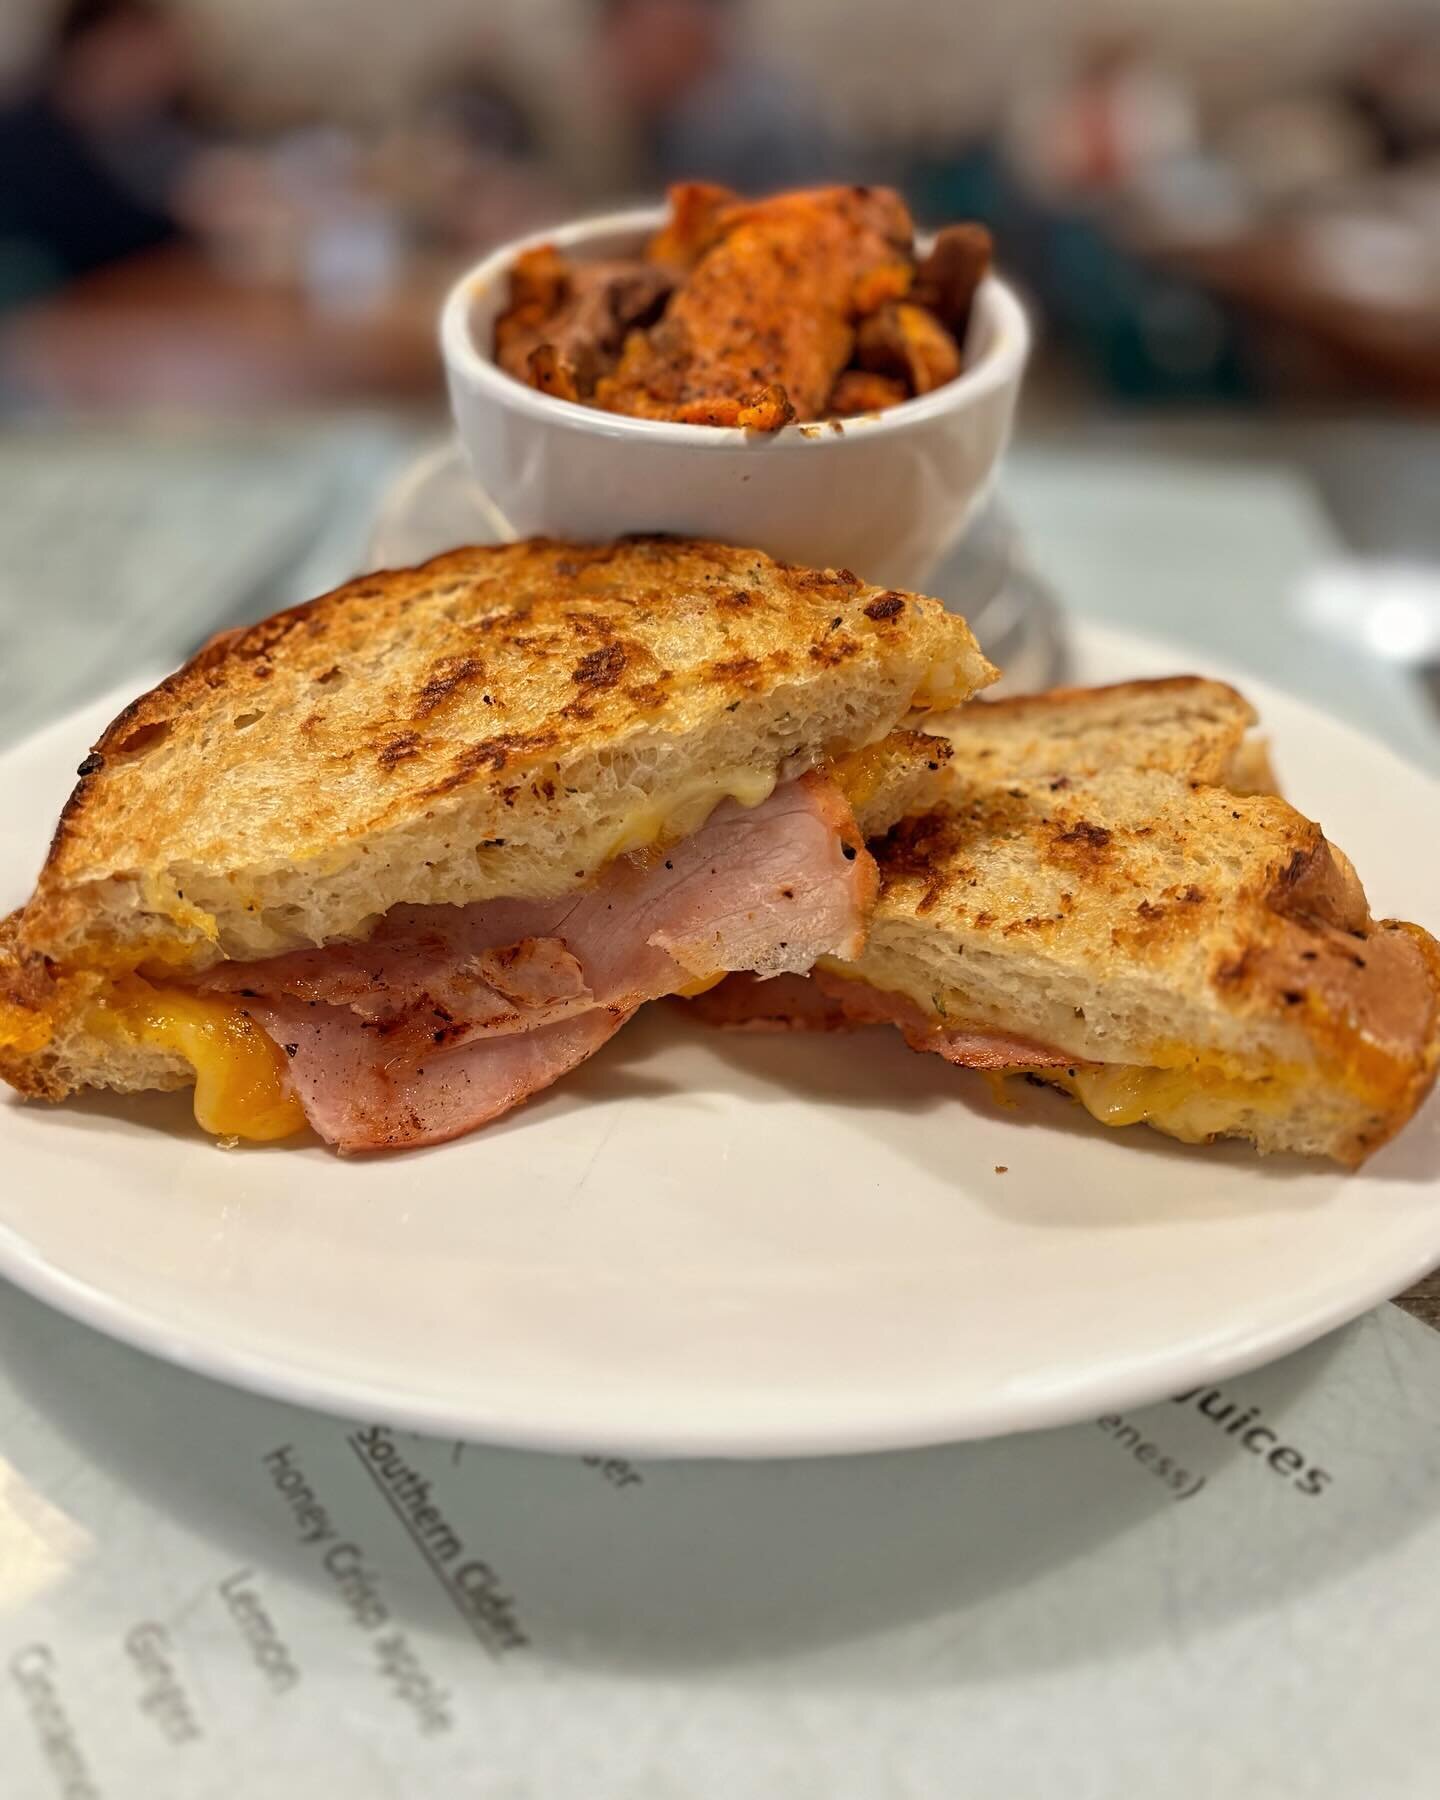 Special of the day : grilled ham and cheese on potato rosemary bread. Served with choice of side . #warehousebakeryanddonuts #fairhope #fairhopealabama #sweethomealabama #bakery #madefromscratch #specialoftheday #fairhoperestaurants #spring #monday